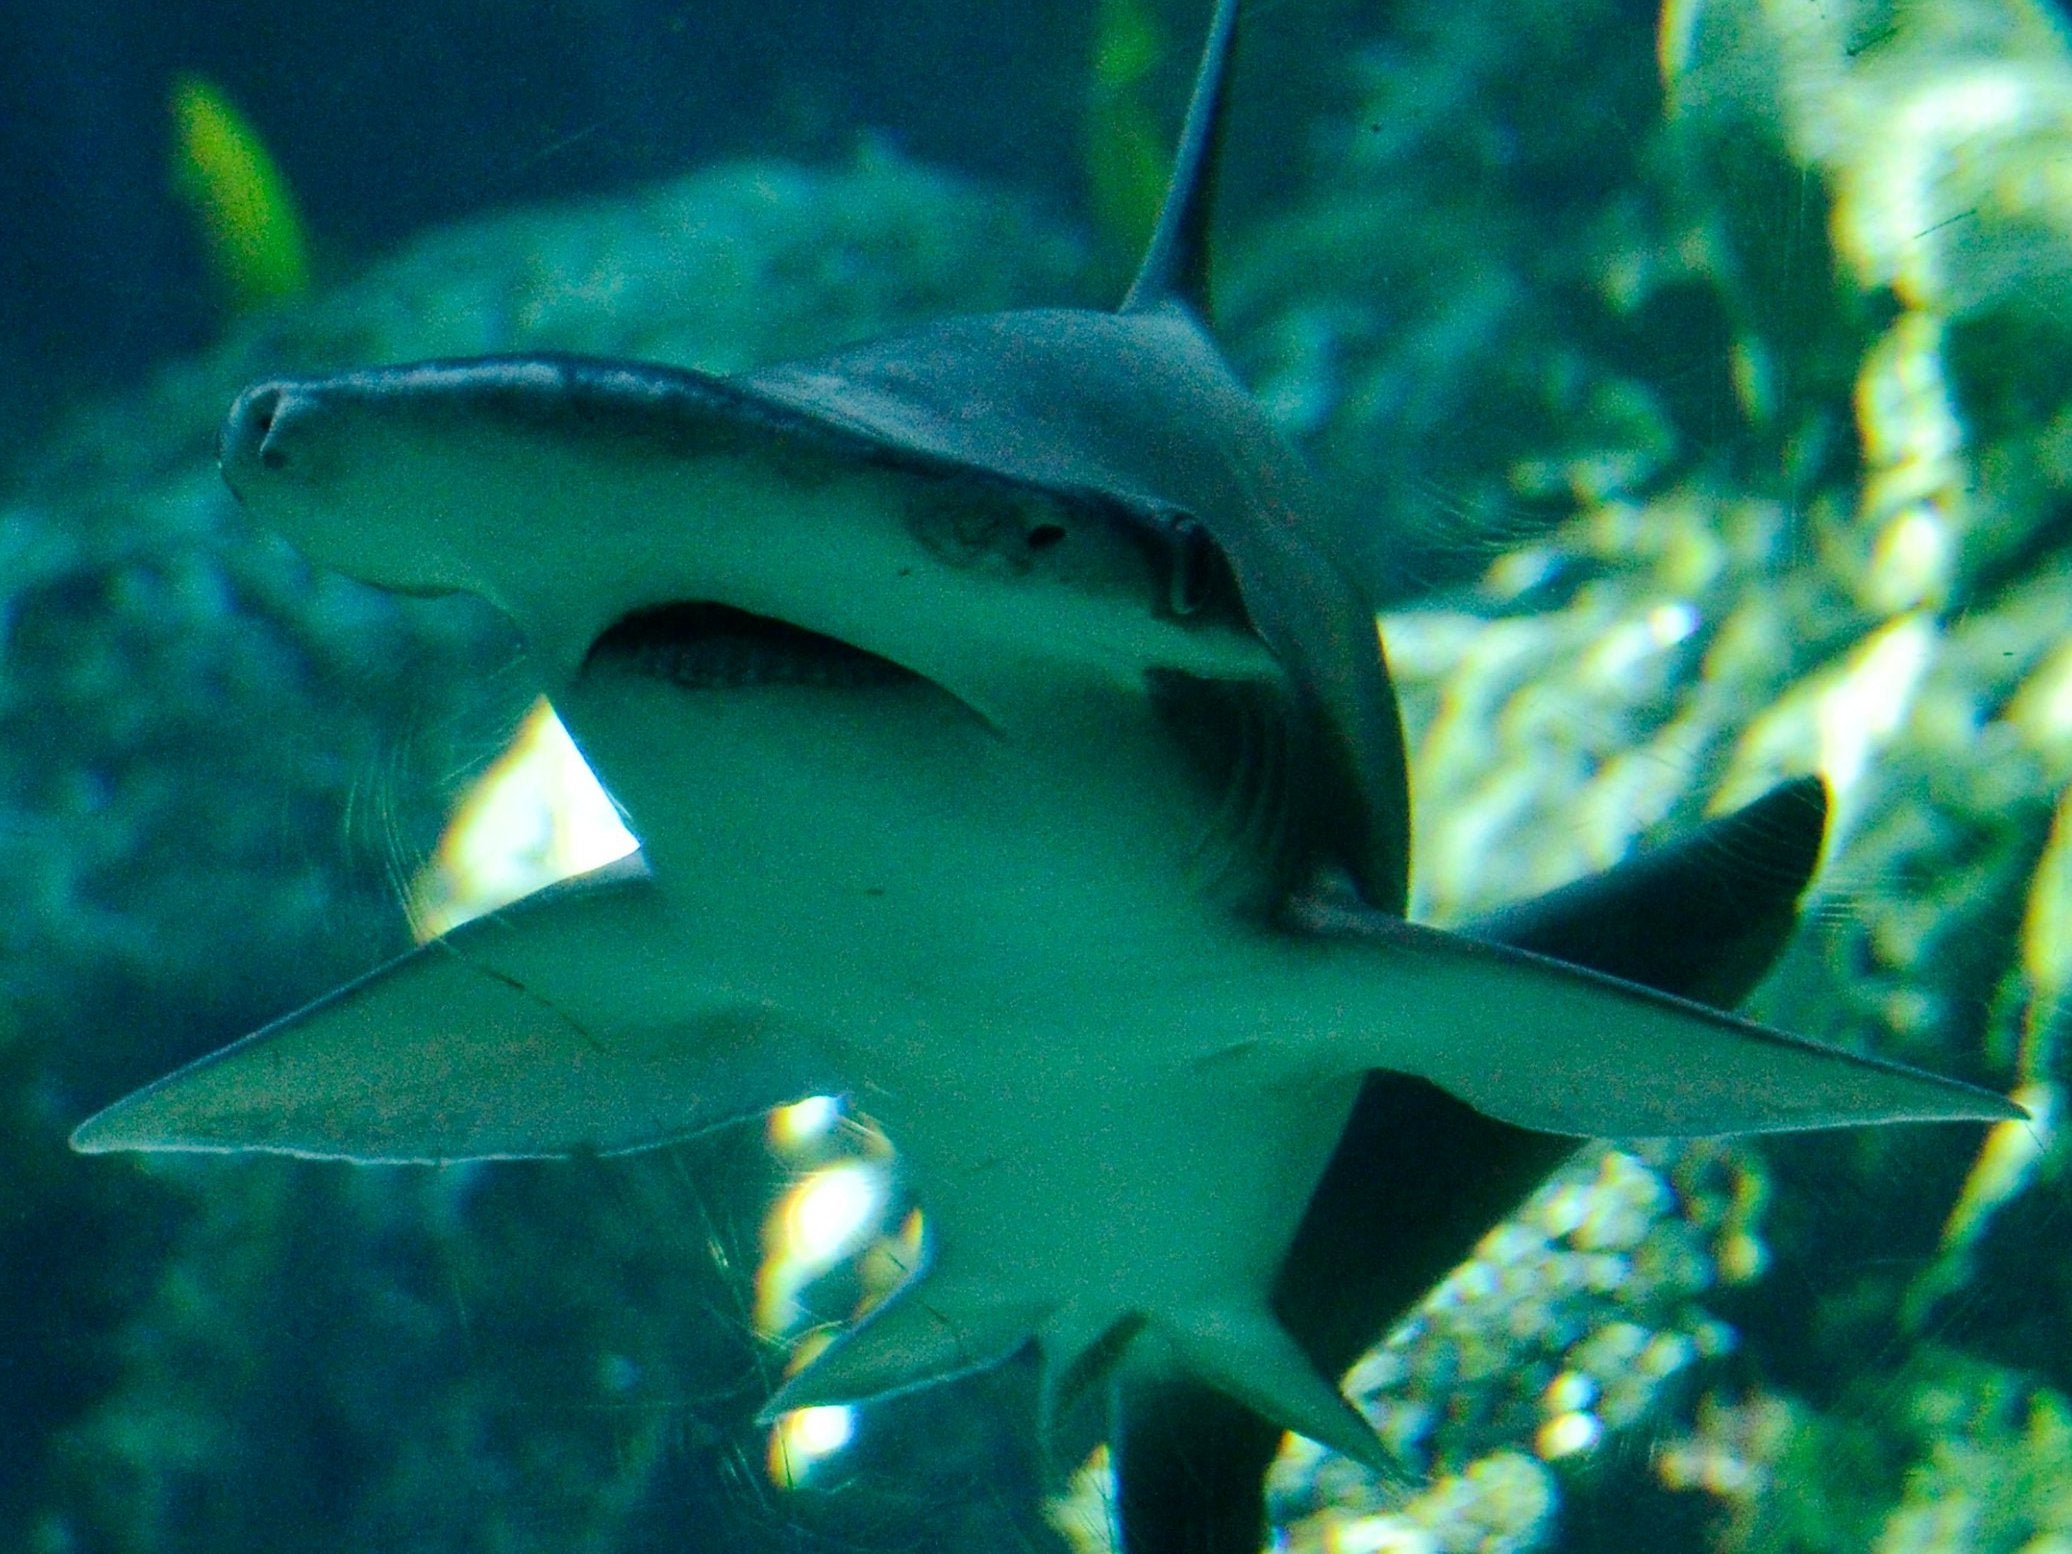 Bonnethead sharks living in the Gulf of Mexico were studied to test their responses to magnetism